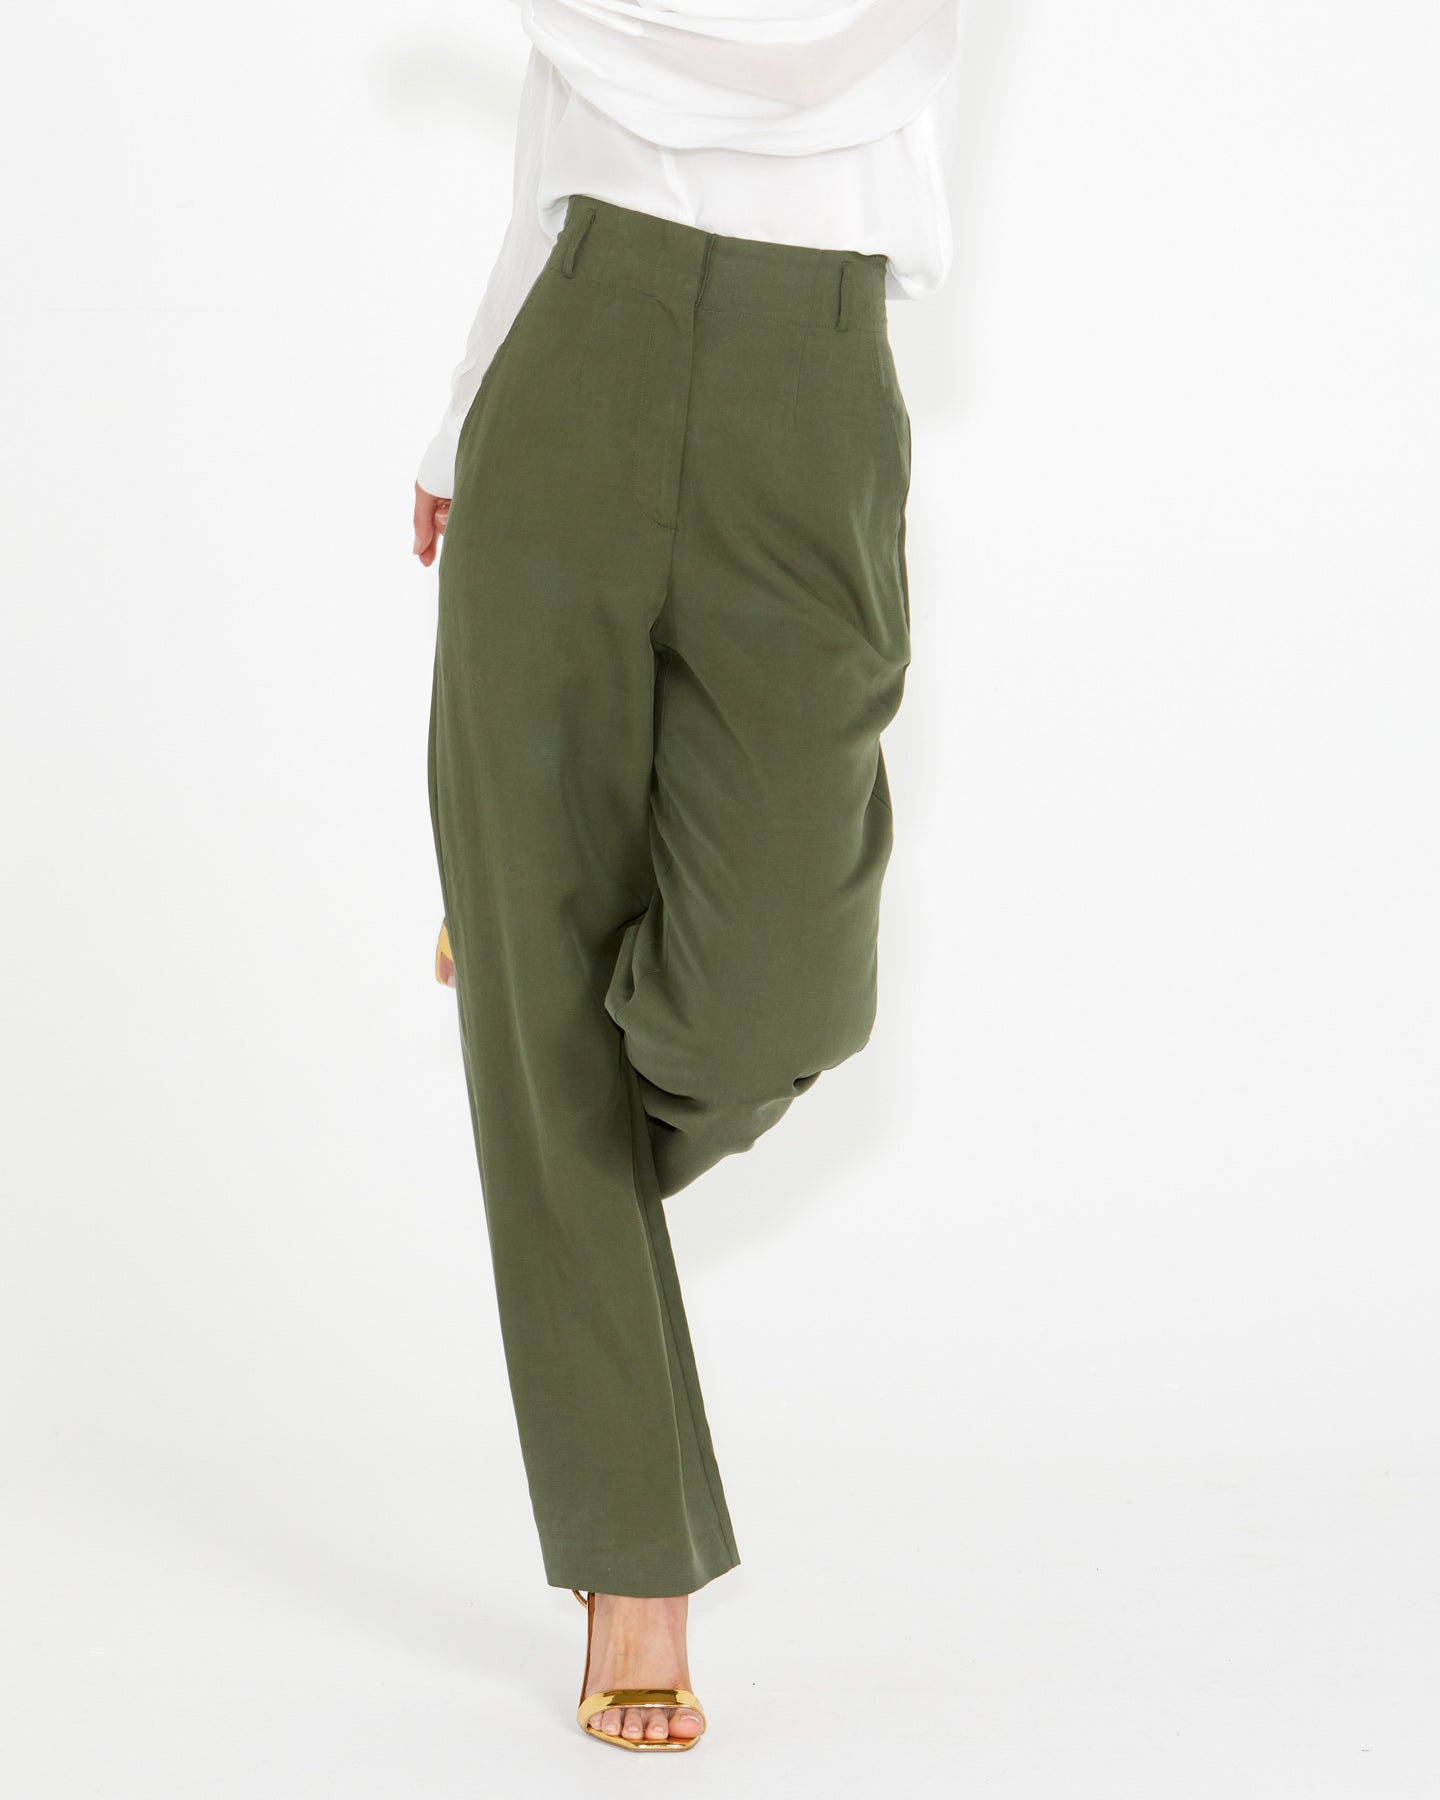 Fate+Becker Alter Ego Tailored Pant - Olive